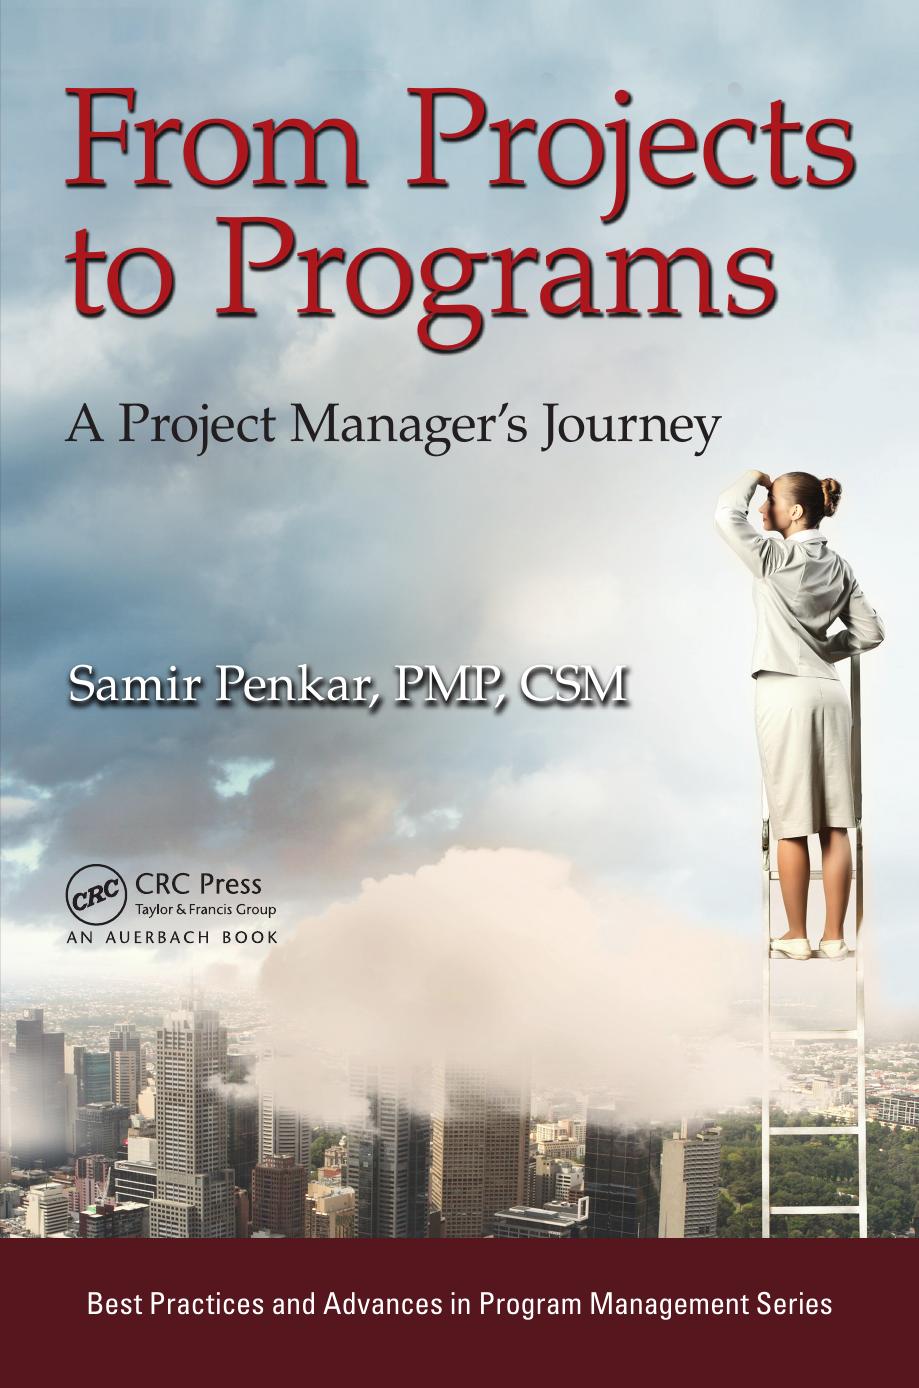 From Projects to Programs: A Project Manager's Journey